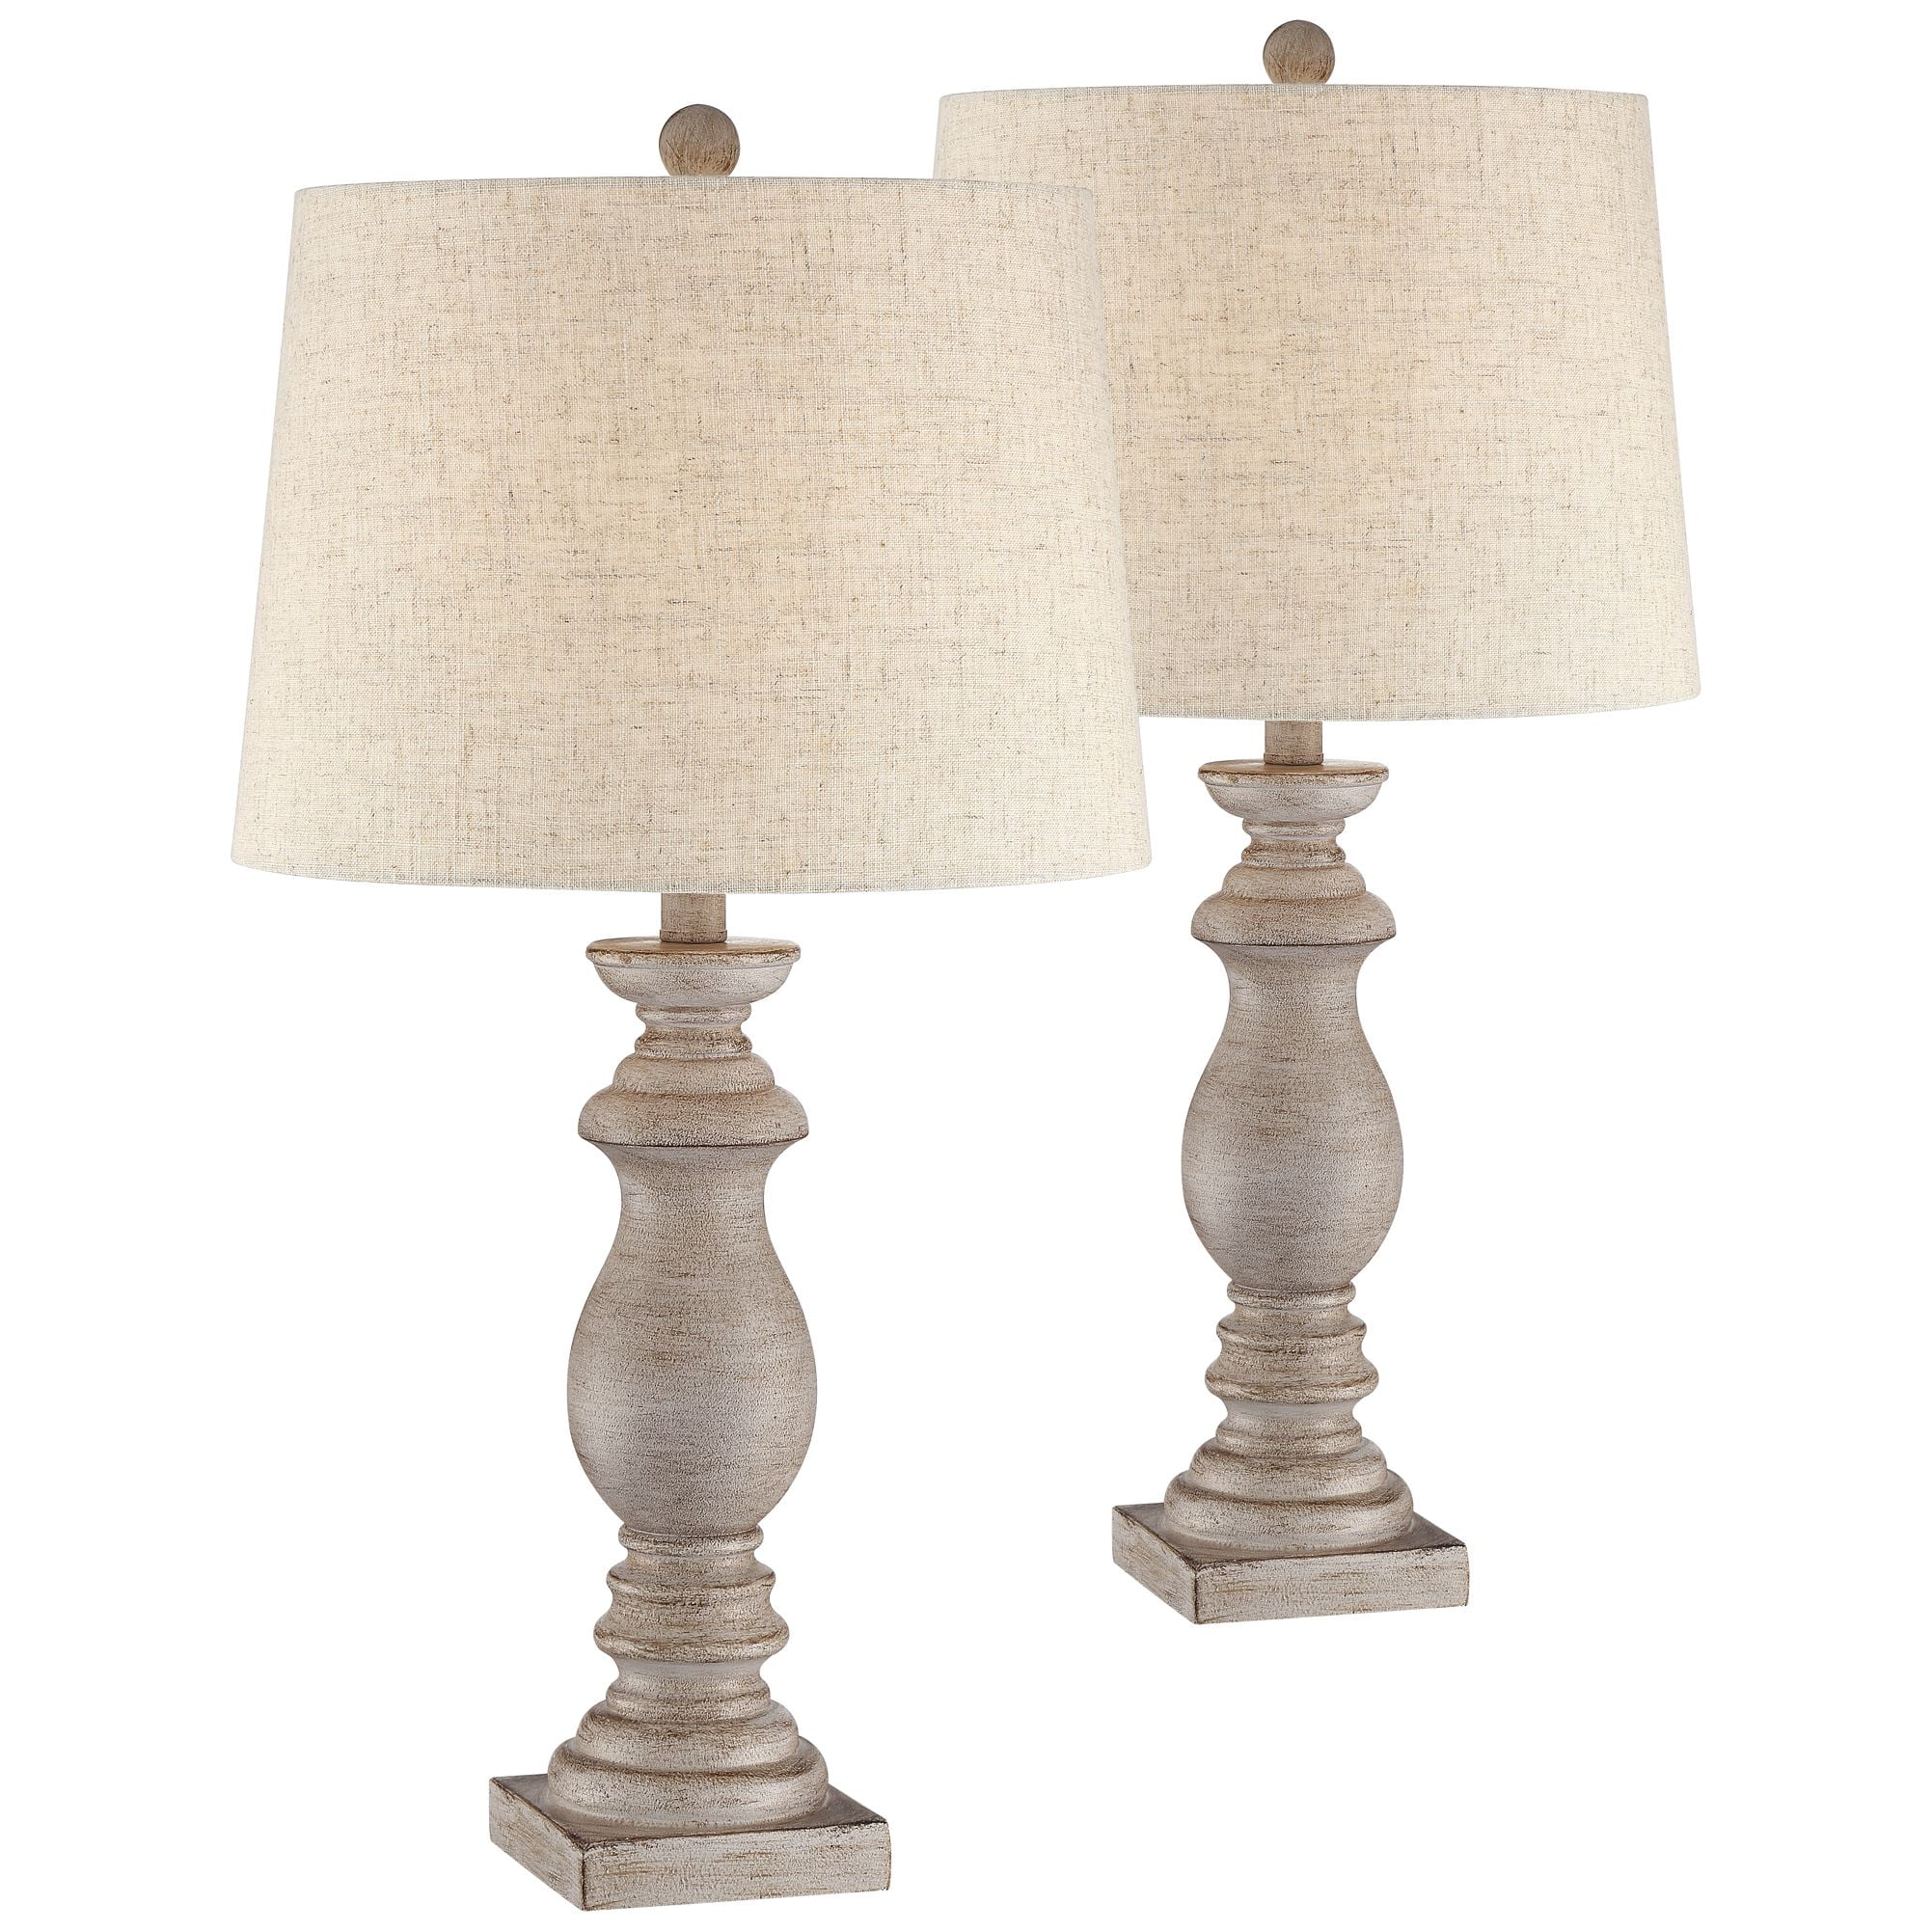 Regency Hill Traditional Table Lamps, Country Table Lamps For Living Room